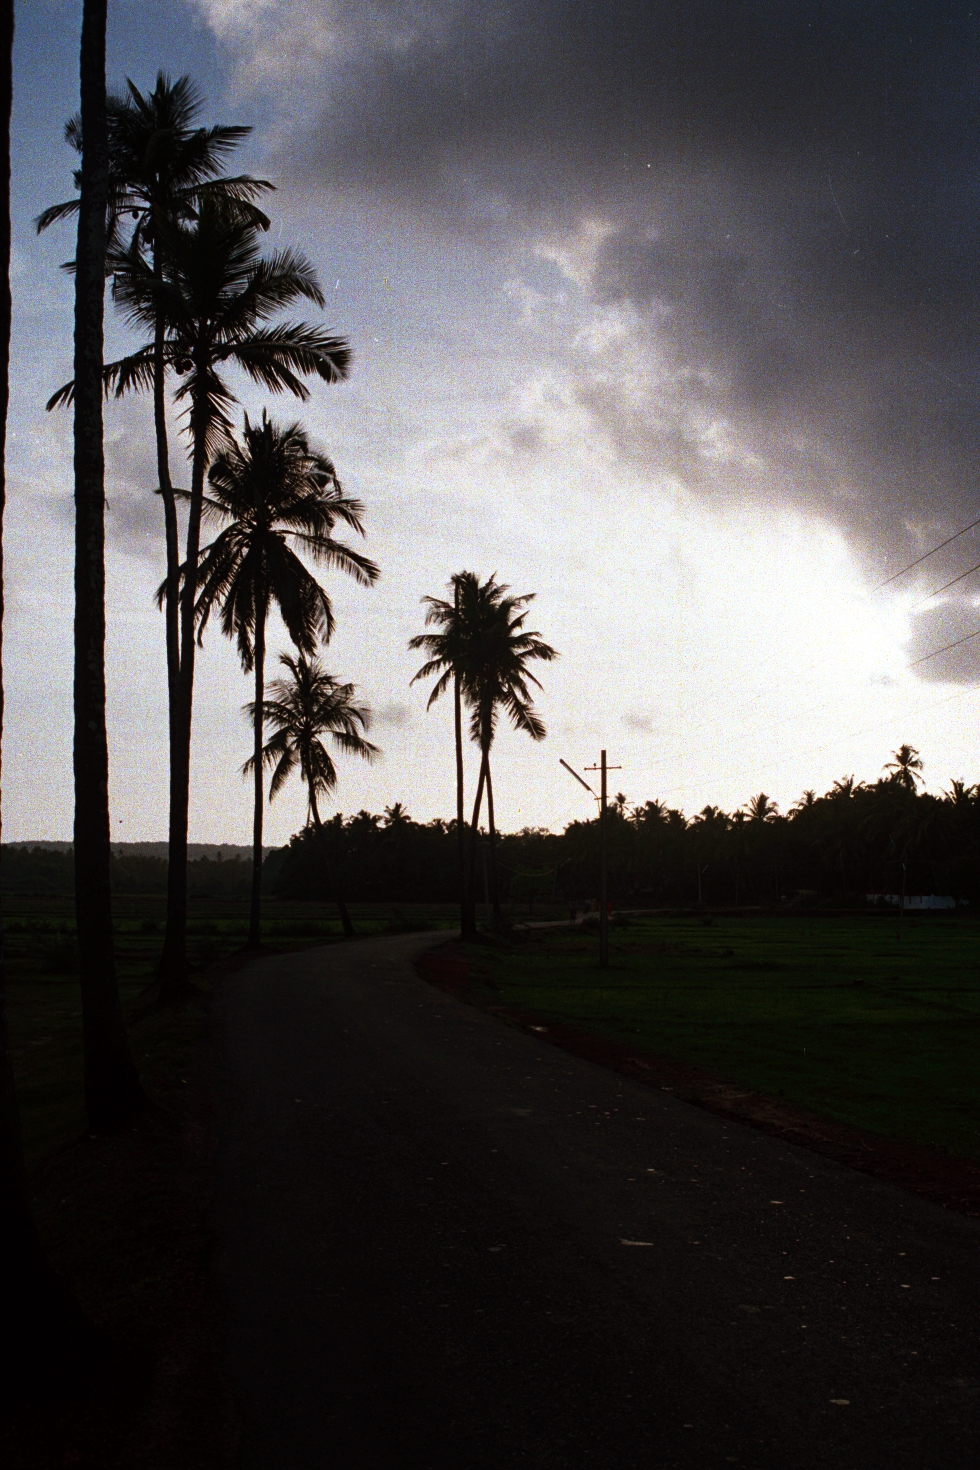 there is a road surrounded by palm trees